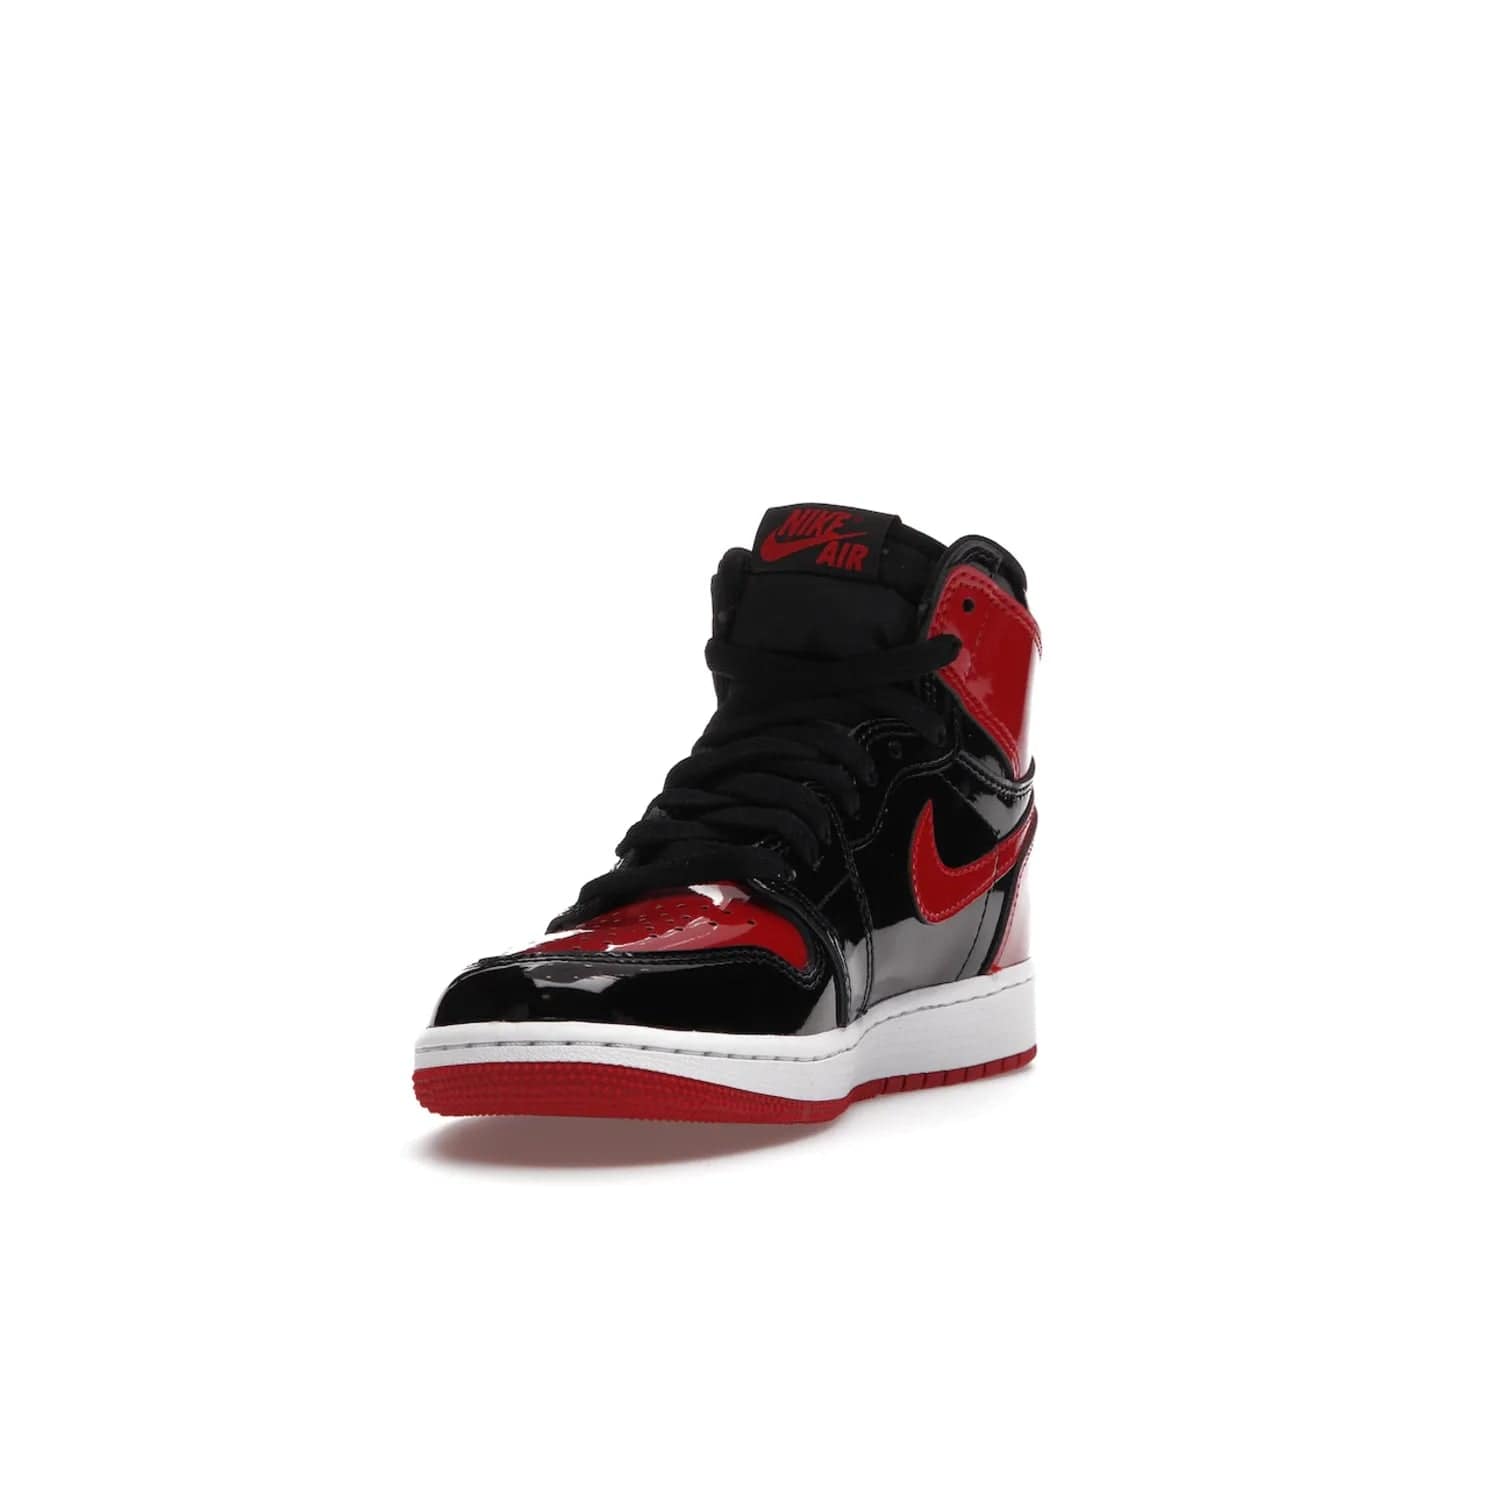 Jordan 1 Retro High OG Patent Bred (GS) - Image 13 - Only at www.BallersClubKickz.com - Upgrade your sneaker game with the iconic Air Jordan 1 Retro High OG Bred Patent GS. Crafted with premium patent leather and basketball-inspired details for a classic look, they also feature an encapsulated Air-sole cushioning and enhanced red rubber outsole. Don't miss this timeless sneaker with a striking black, white, and varsity red colorway, dropping December 2021.